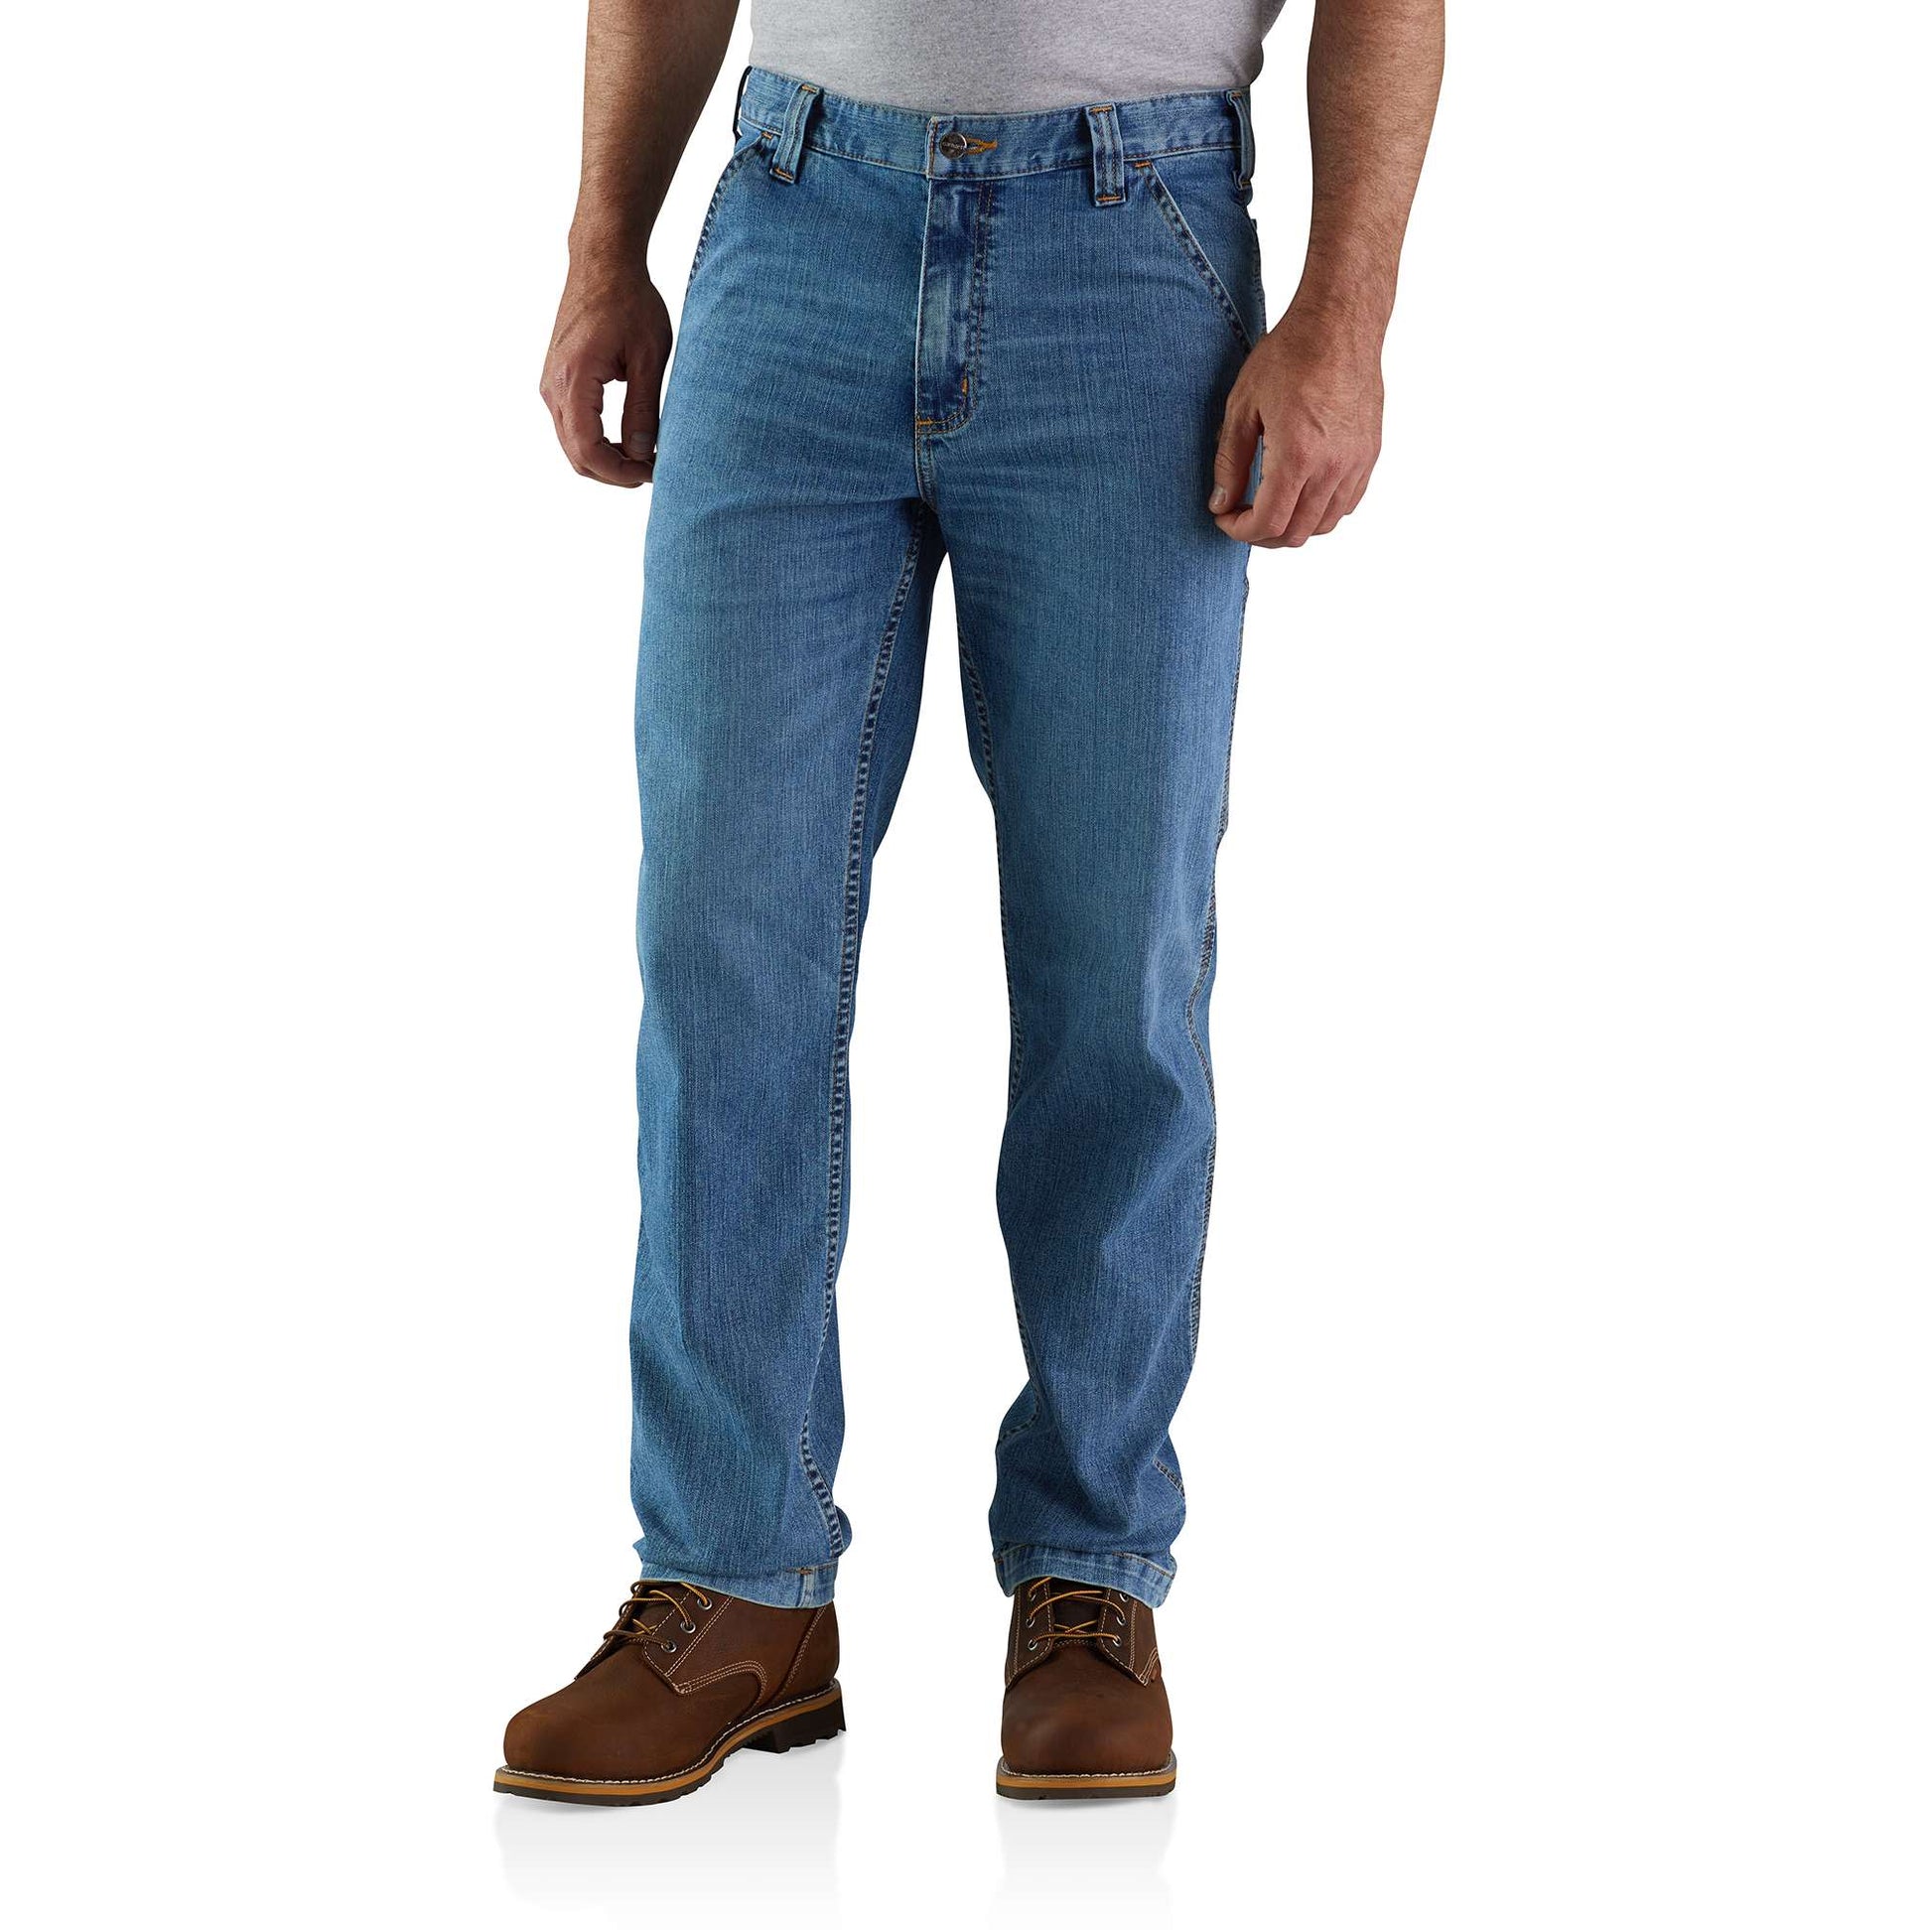 Carhartt Men's Rugged Flex Relaxed Fit Utility Logger Jeans - Freight